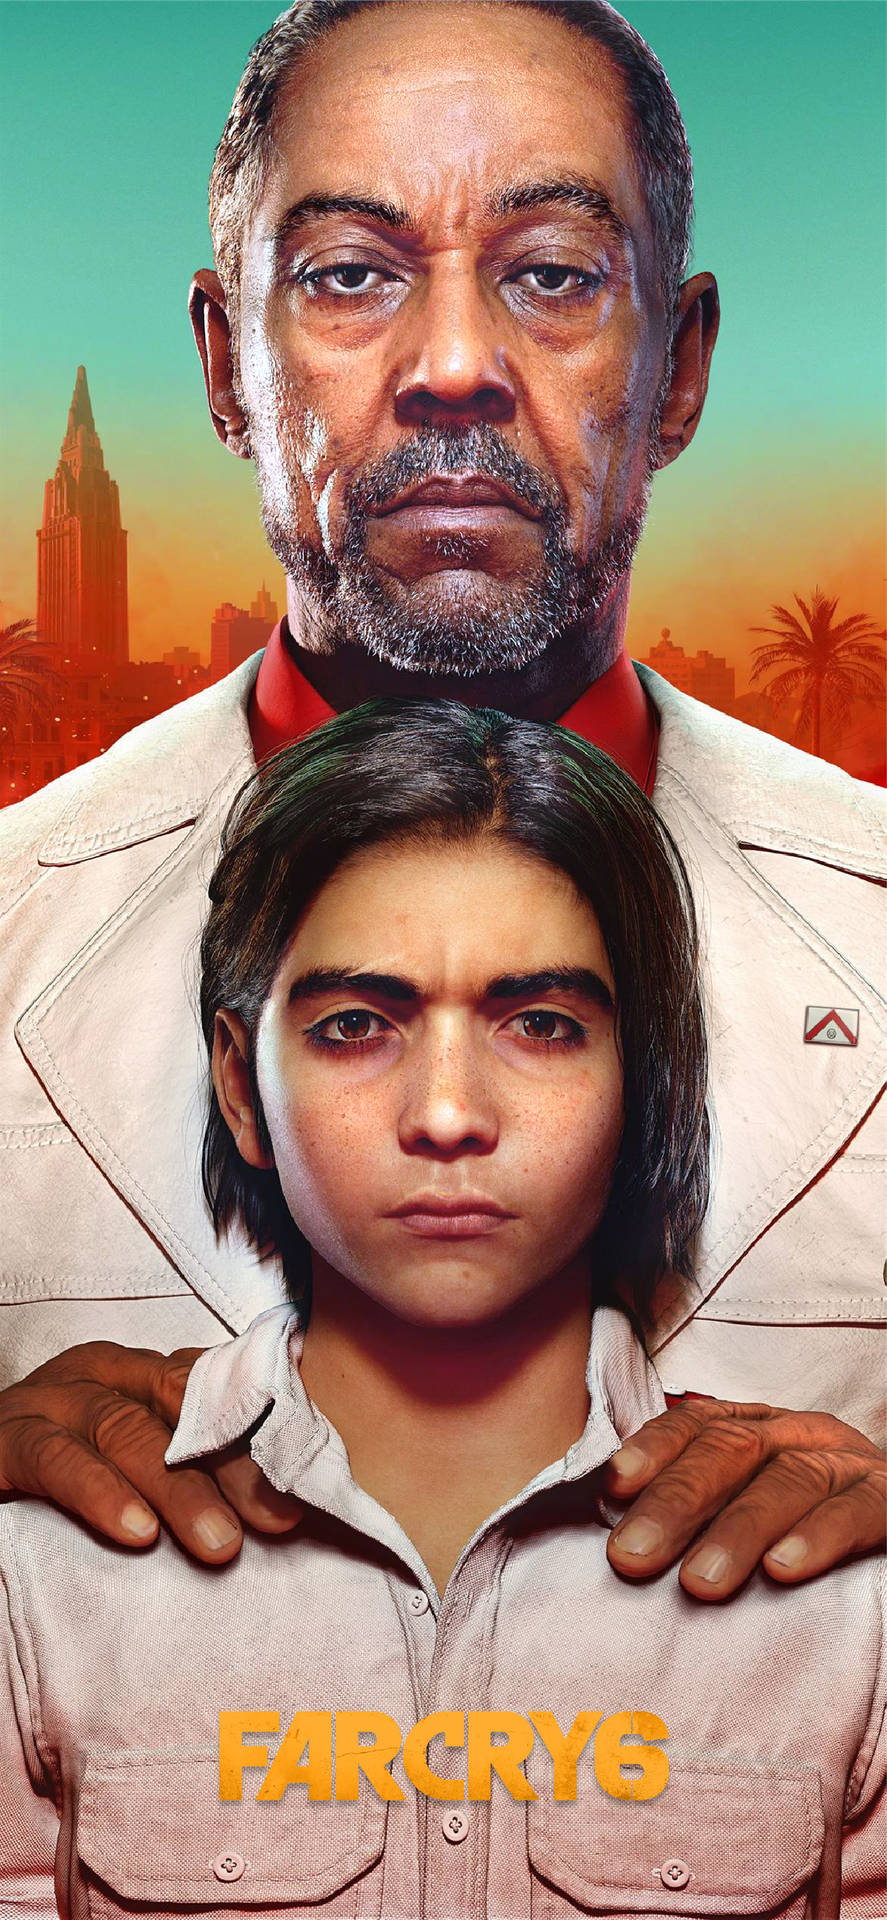 Father And Son Far Cry Iphone